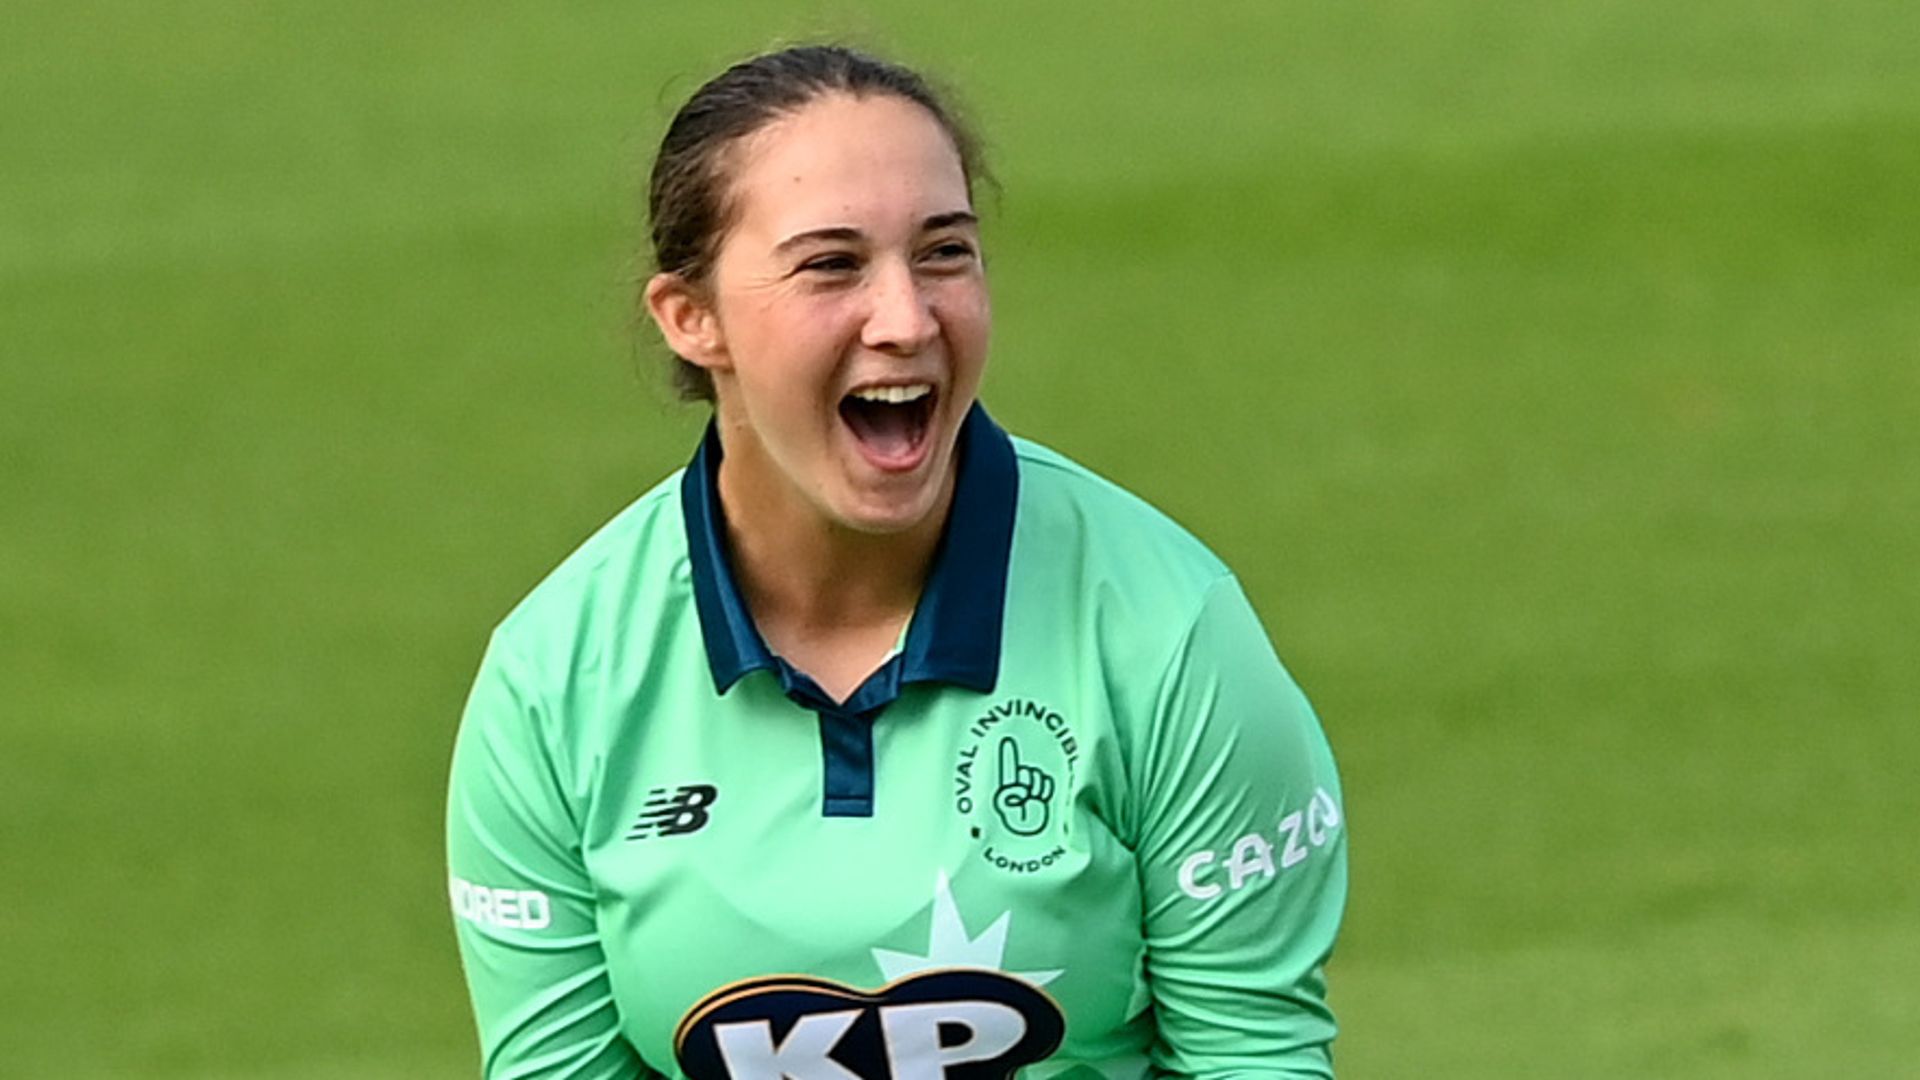 'Superstar in the making' Capsey among English WBBL contingent